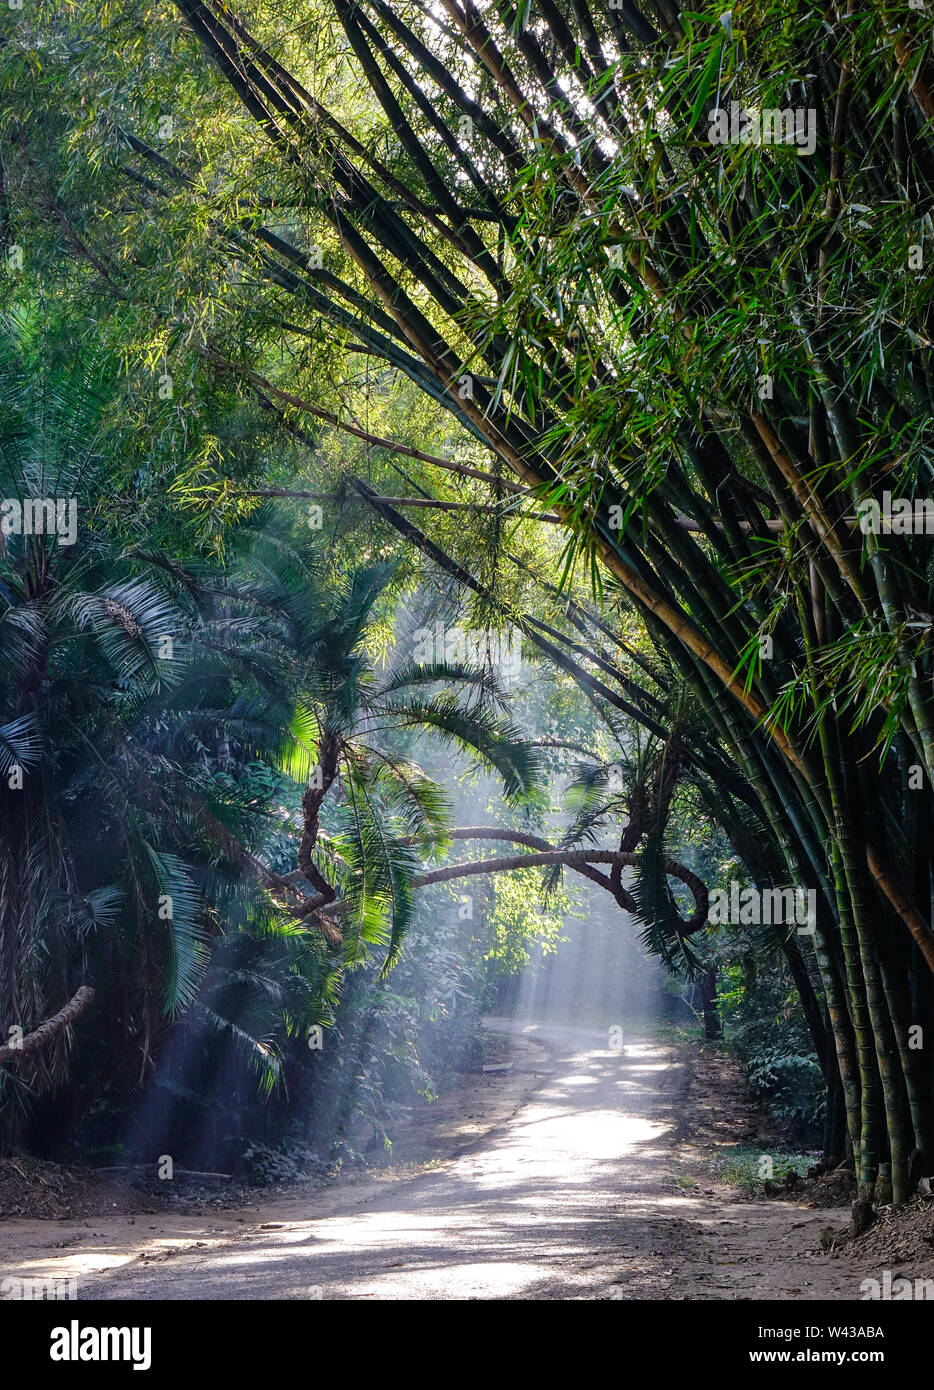 Bamboo forest with plam trees under sun lights at Botanical Gardens in Pyin Oo Lwin, Myanmar. Stock Photo